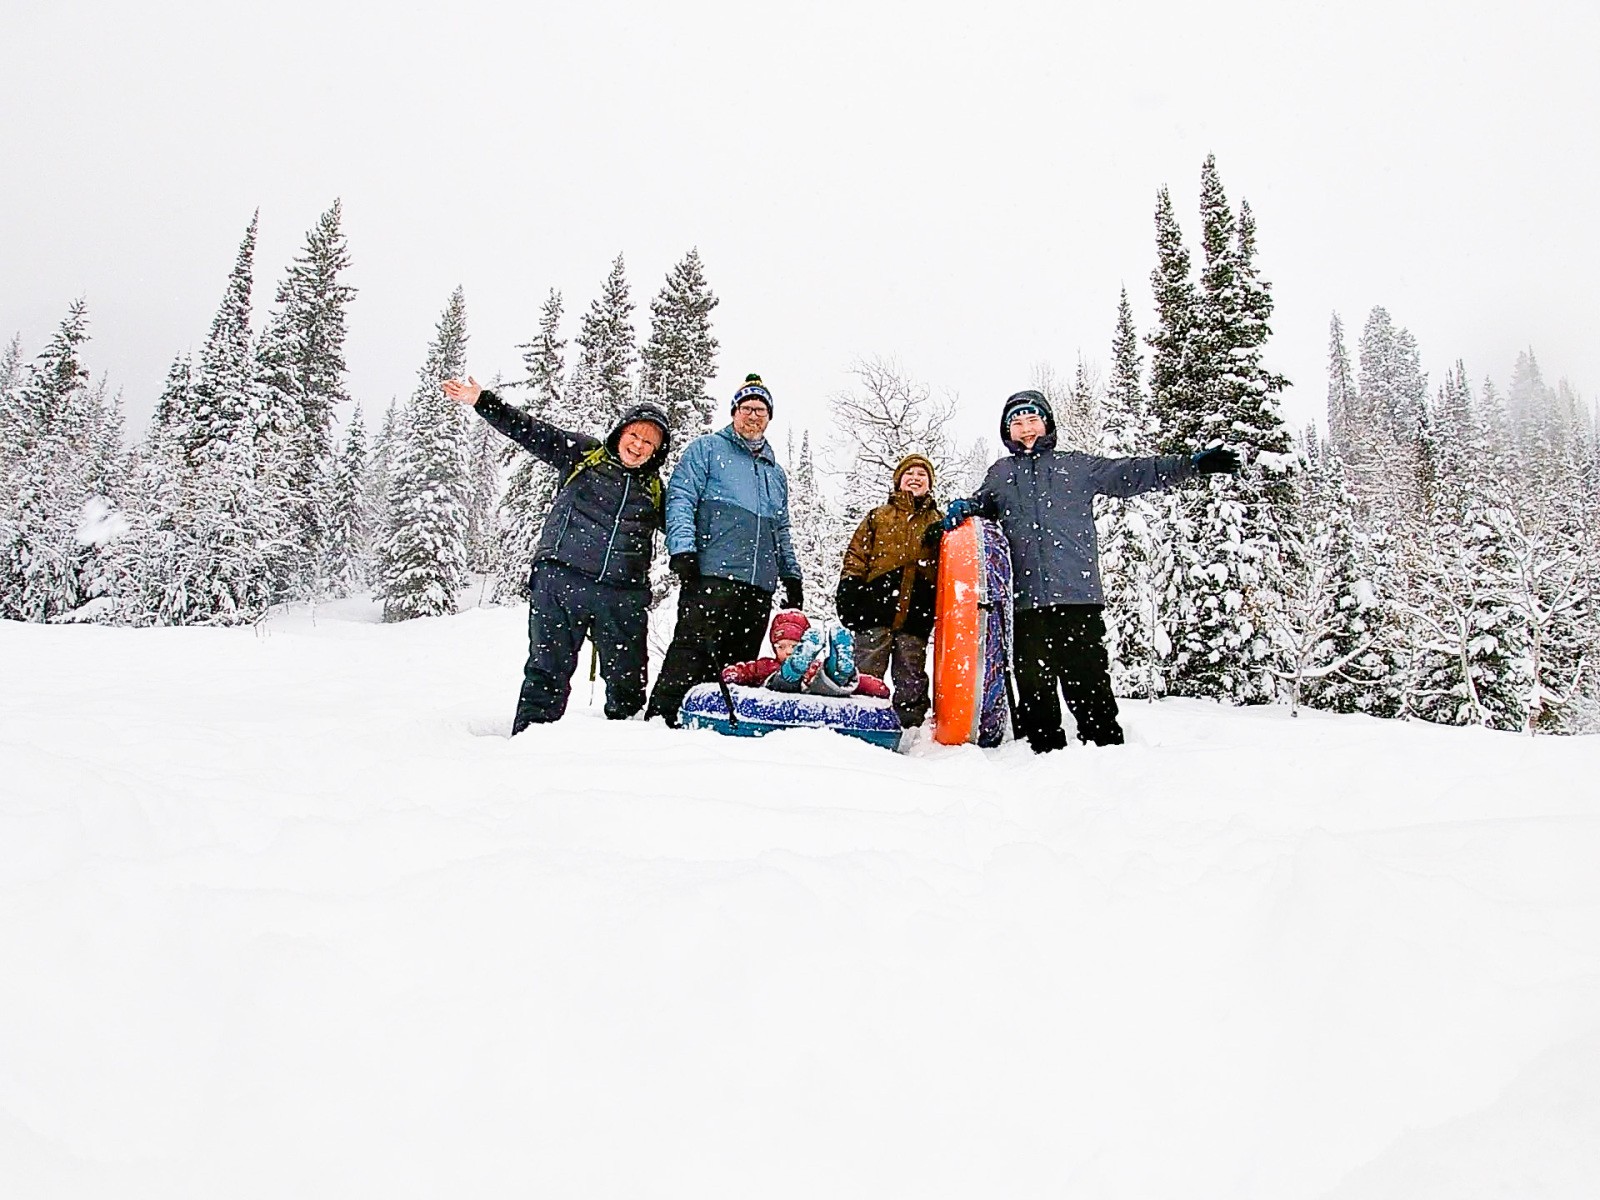 Family Winter Activities For Non-Skiers